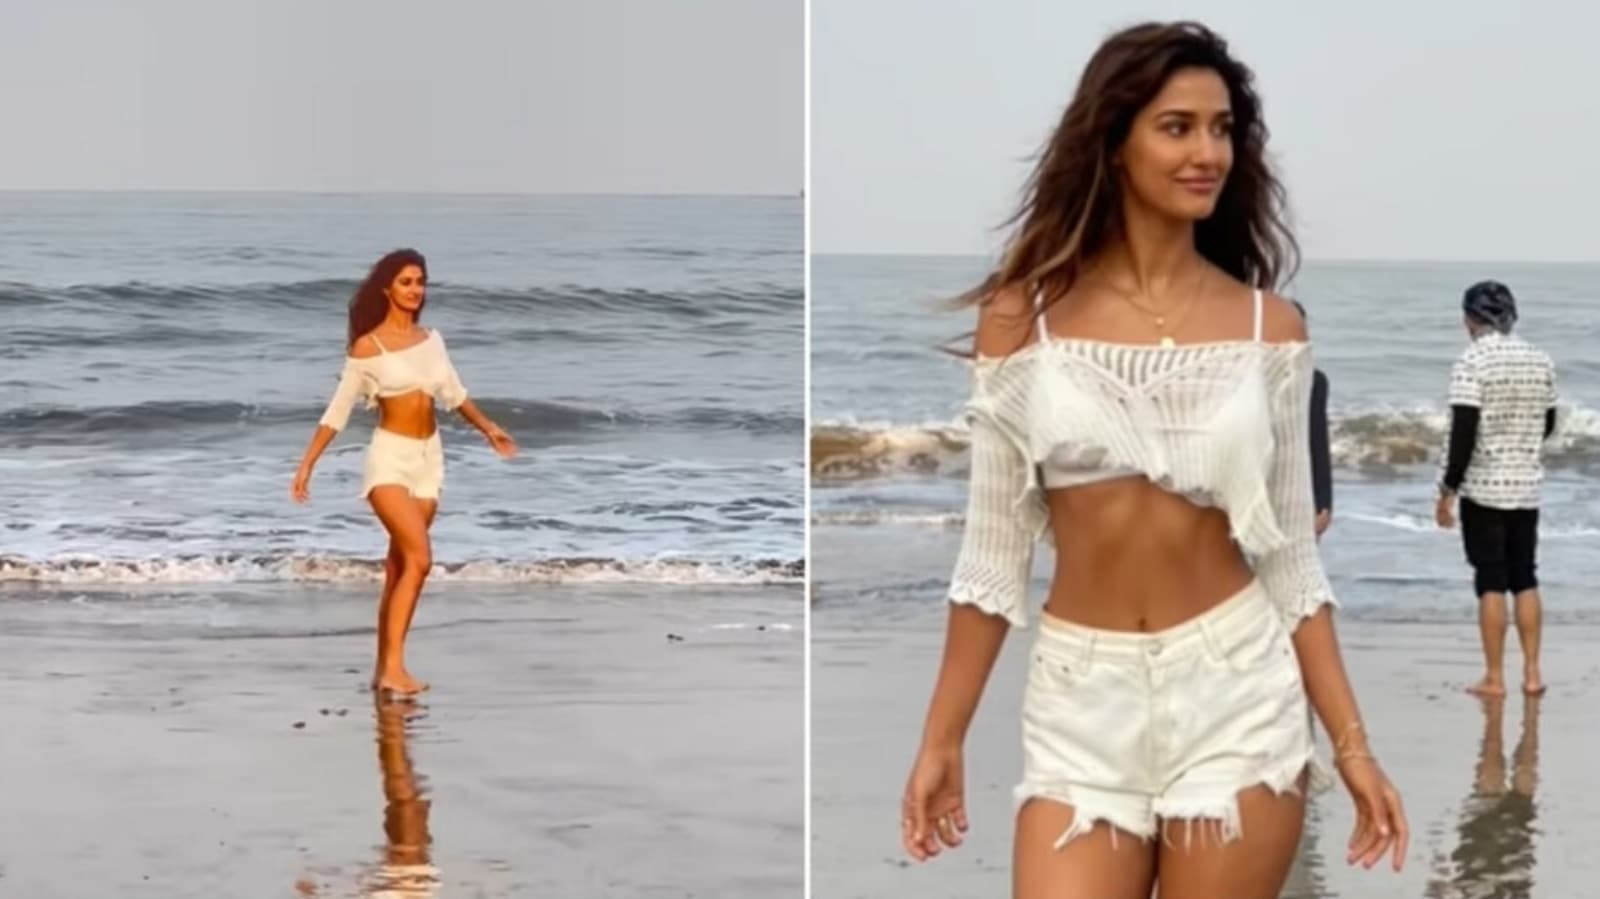 Disha Patani Xxx And Sexy Videos - Disha Patani shares her video from beach day, fans say 'gorgeous'. Watch |  Bollywood - Hindustan Times